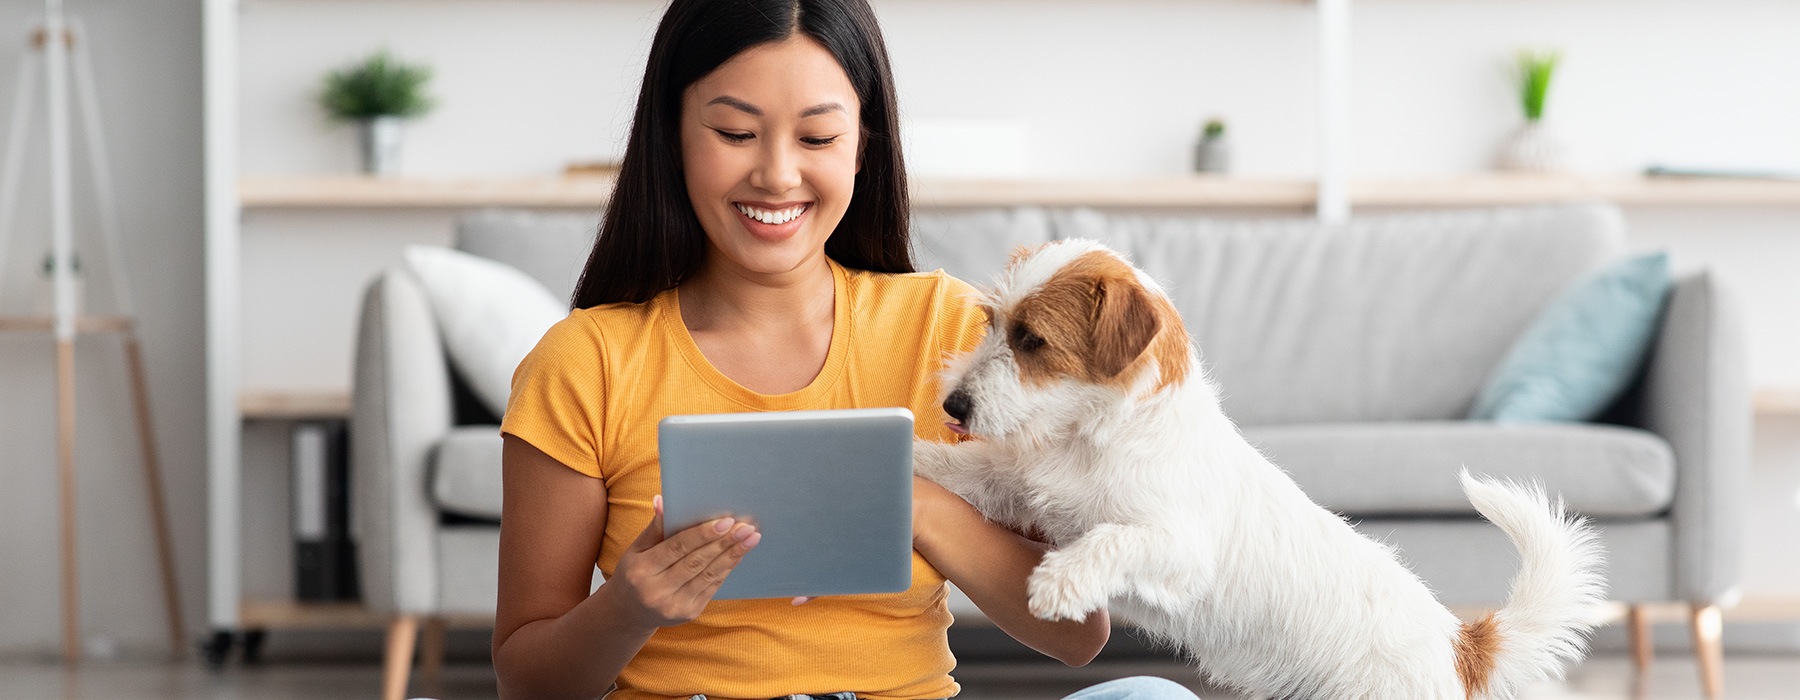 lifestyle image of a woman with a pet in a bright living room